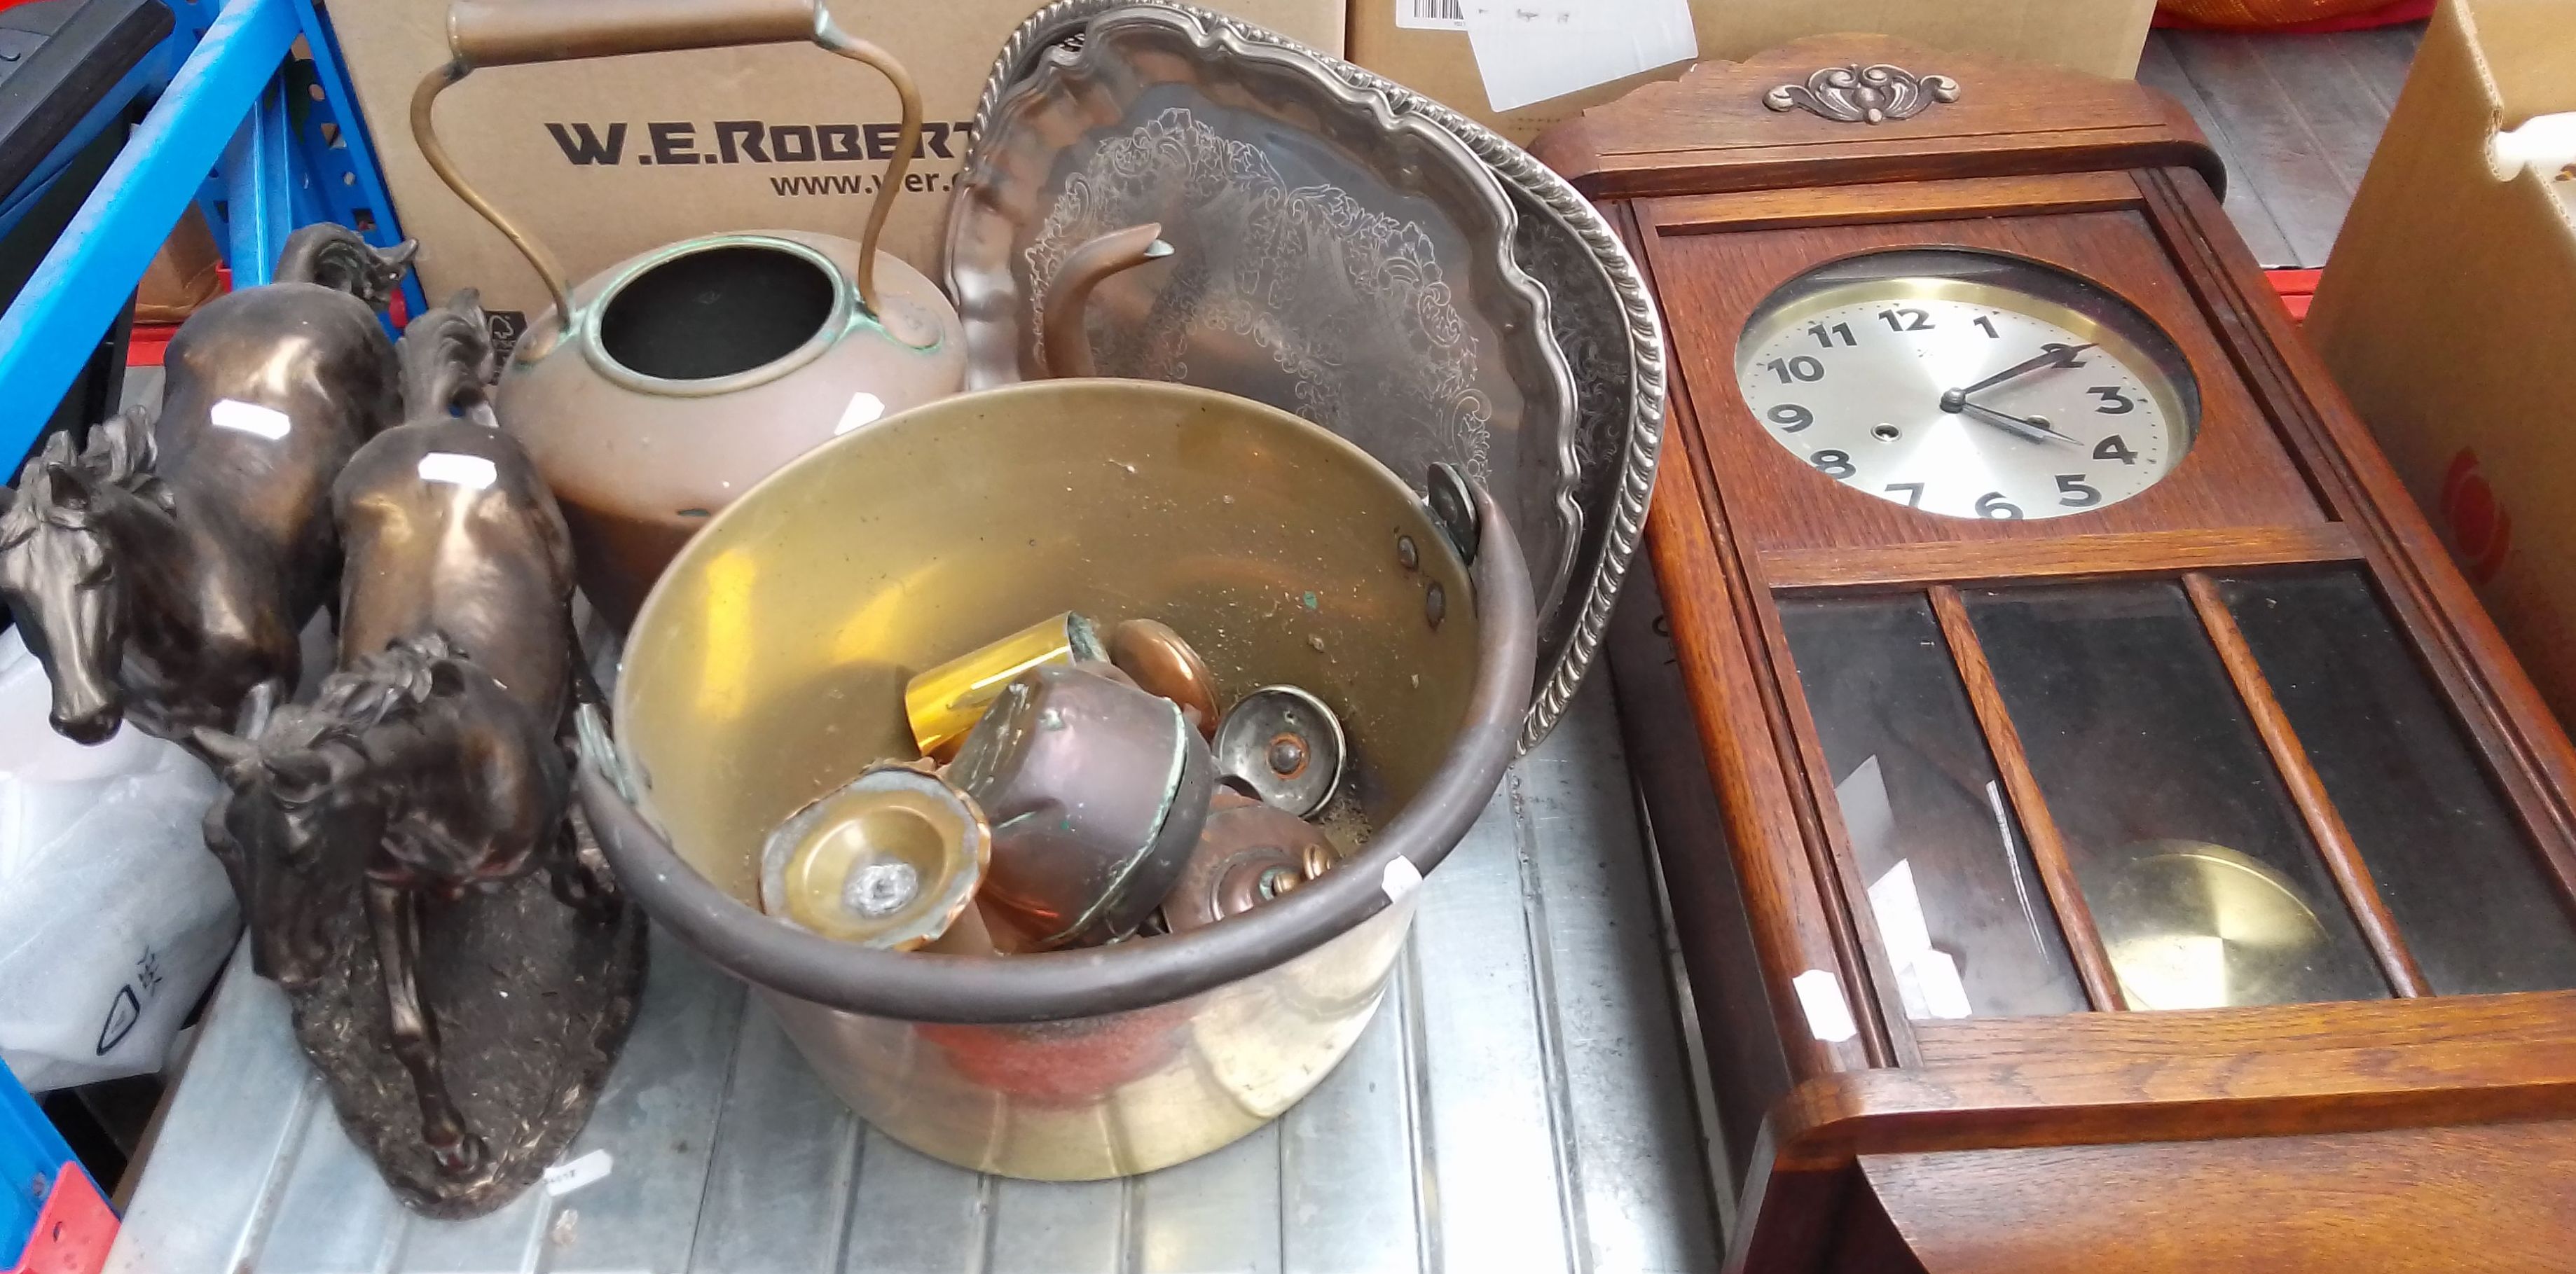 A wall clock, 2 metal salvers, a brass jam pan, a copper kettle, and a composite model of two horses